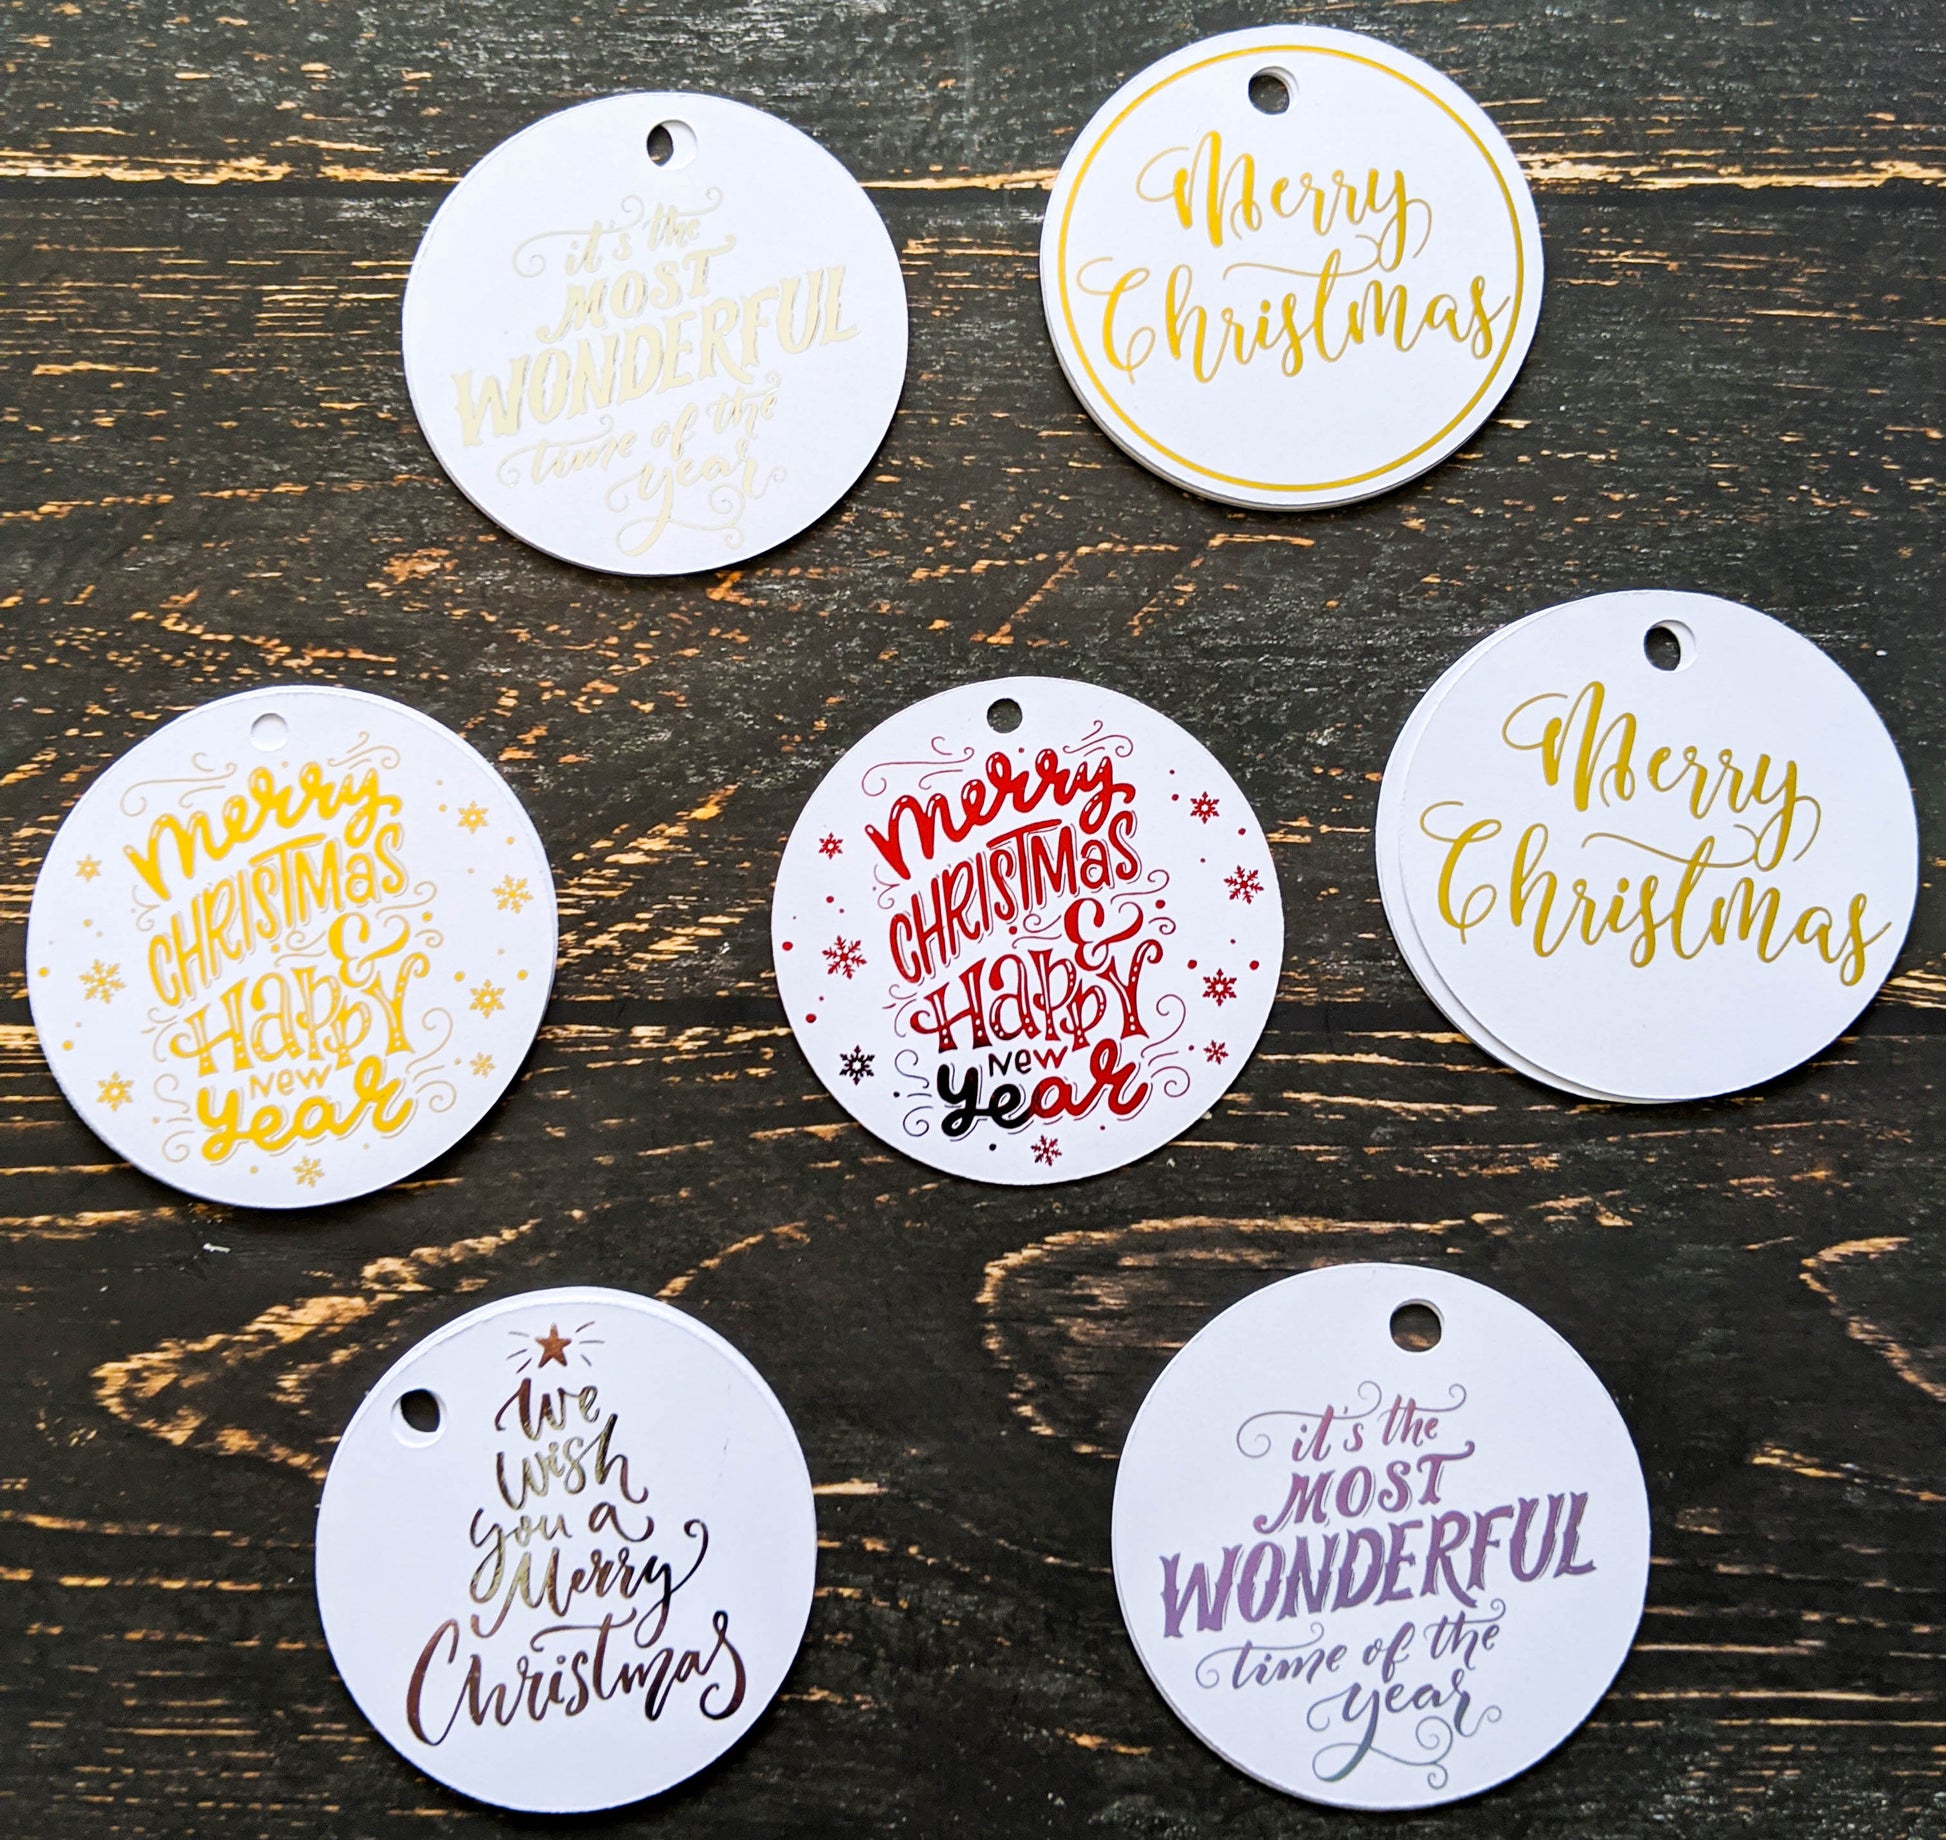 E&L Designs Round Christmas Tags Pack of 12